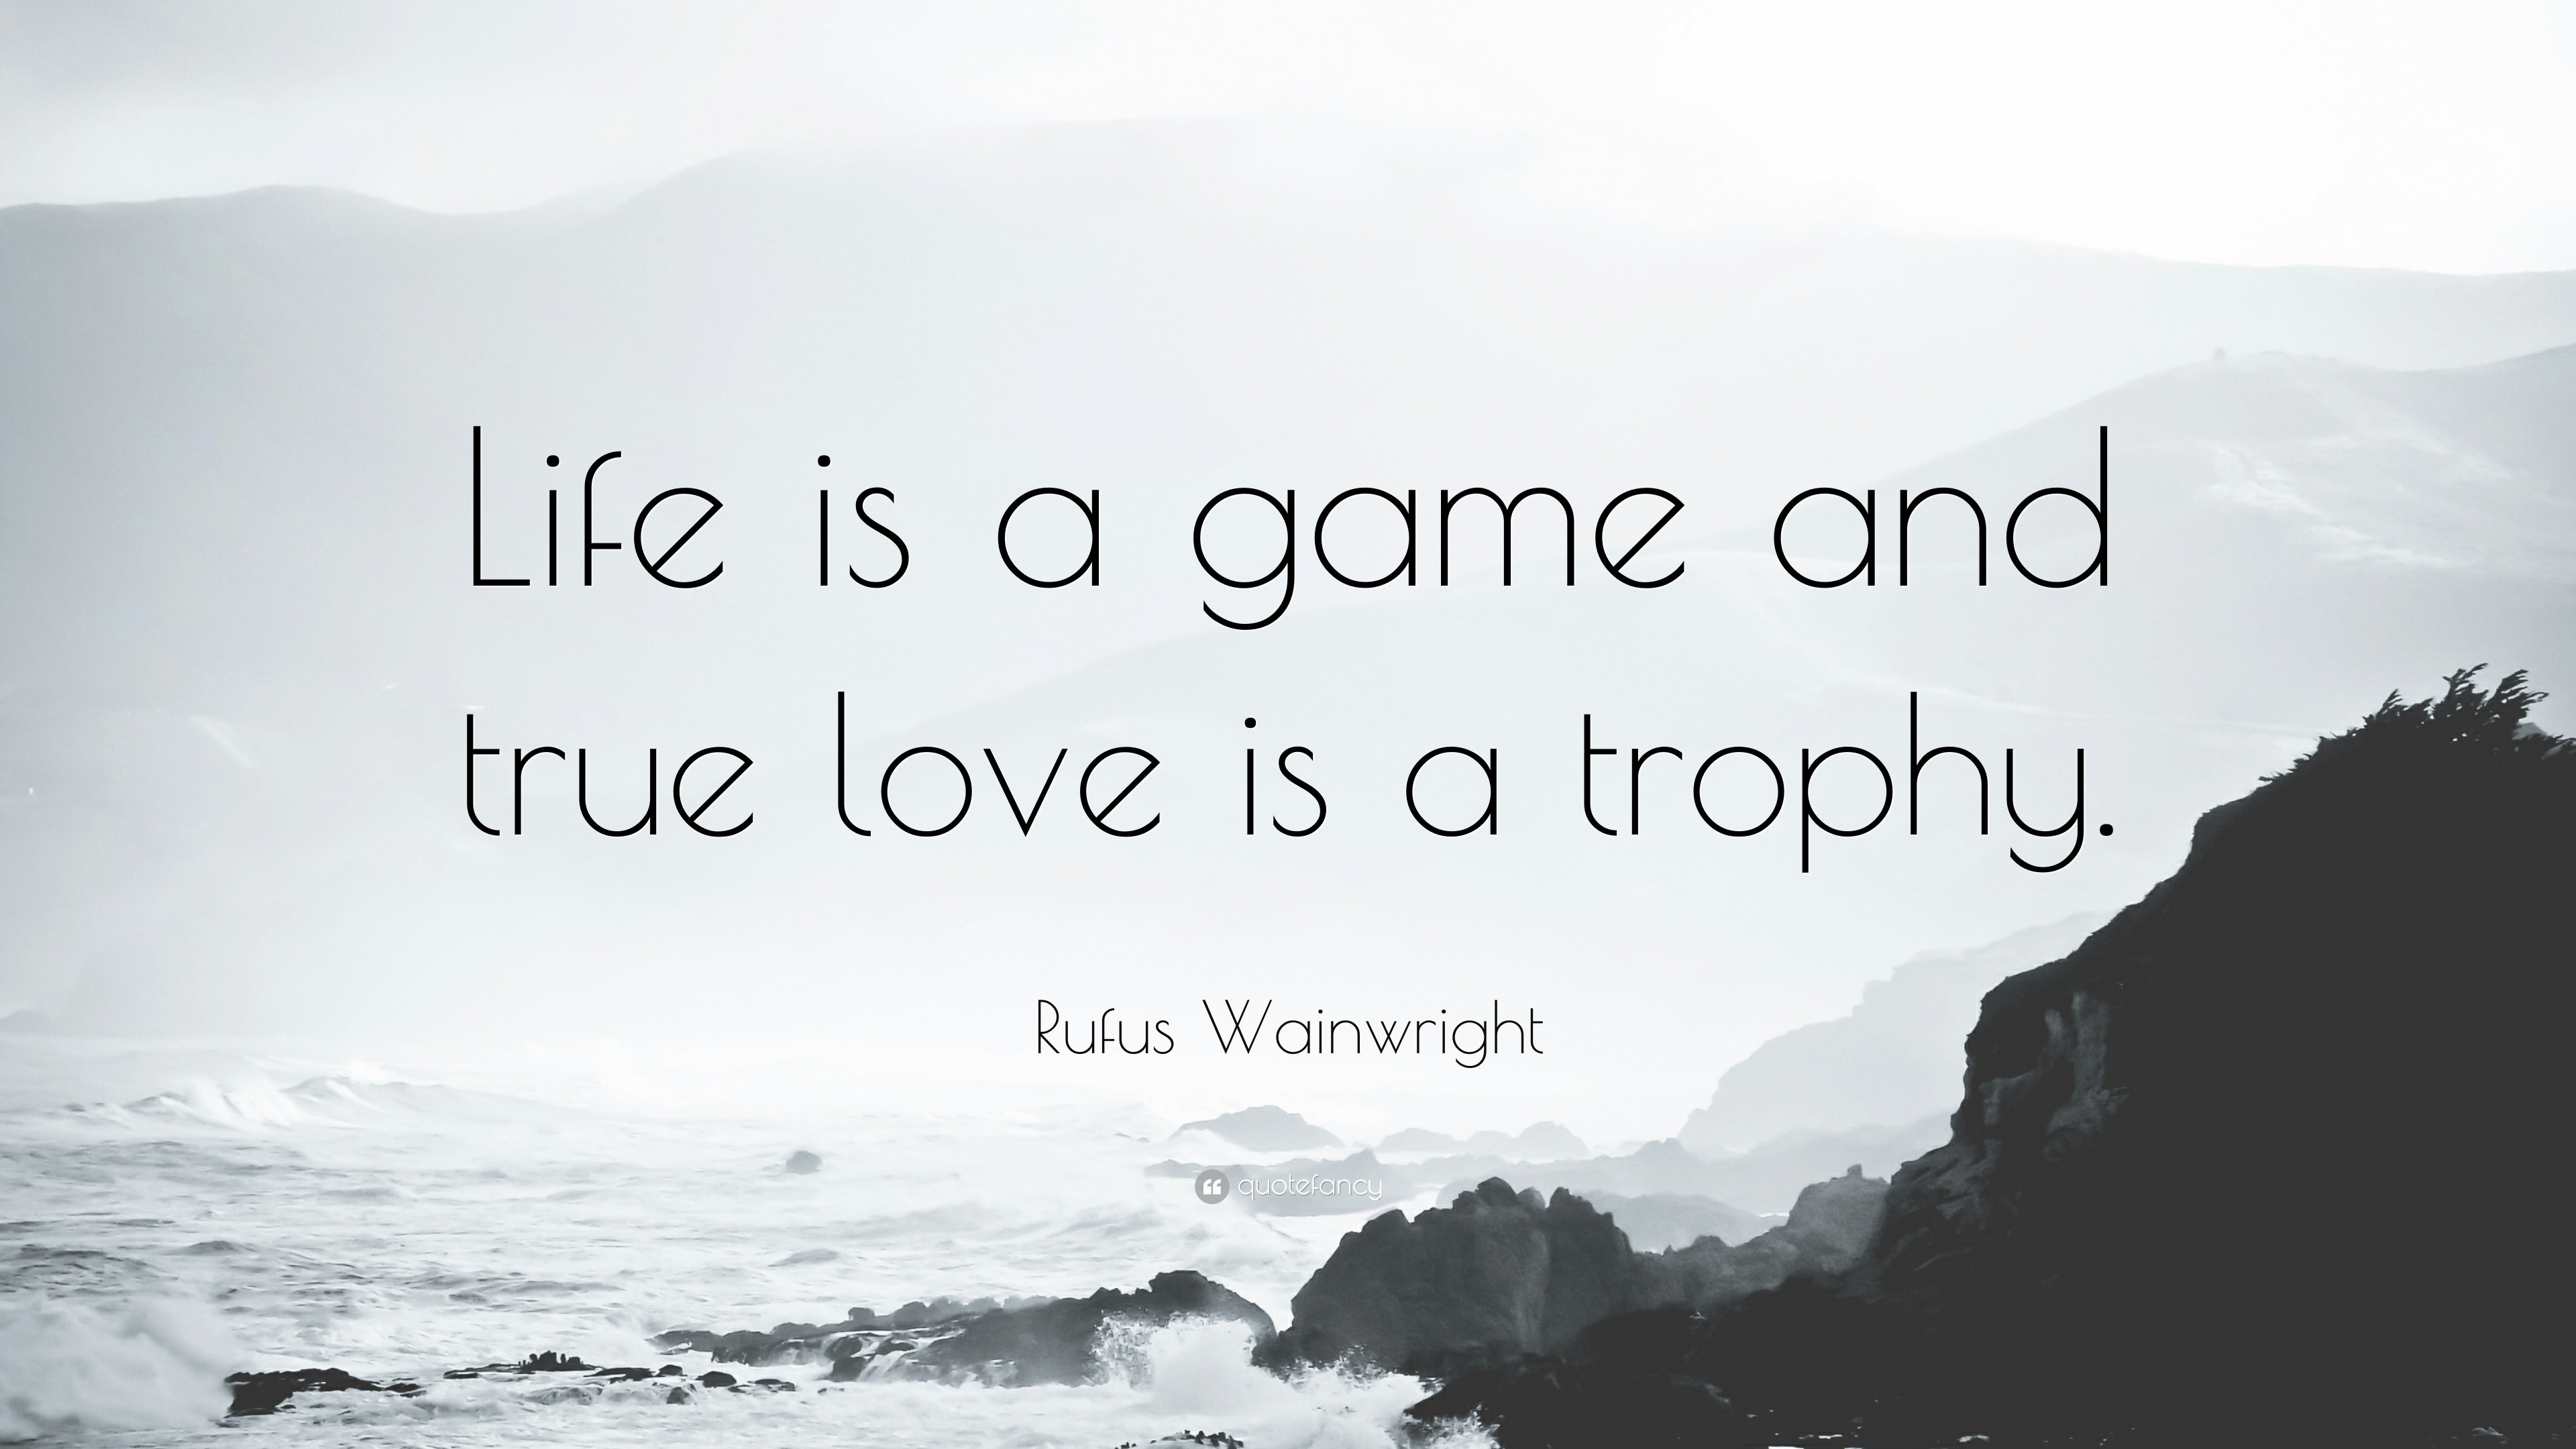 Rufus Wainwright Quote “Life is a game and true love is a trophy